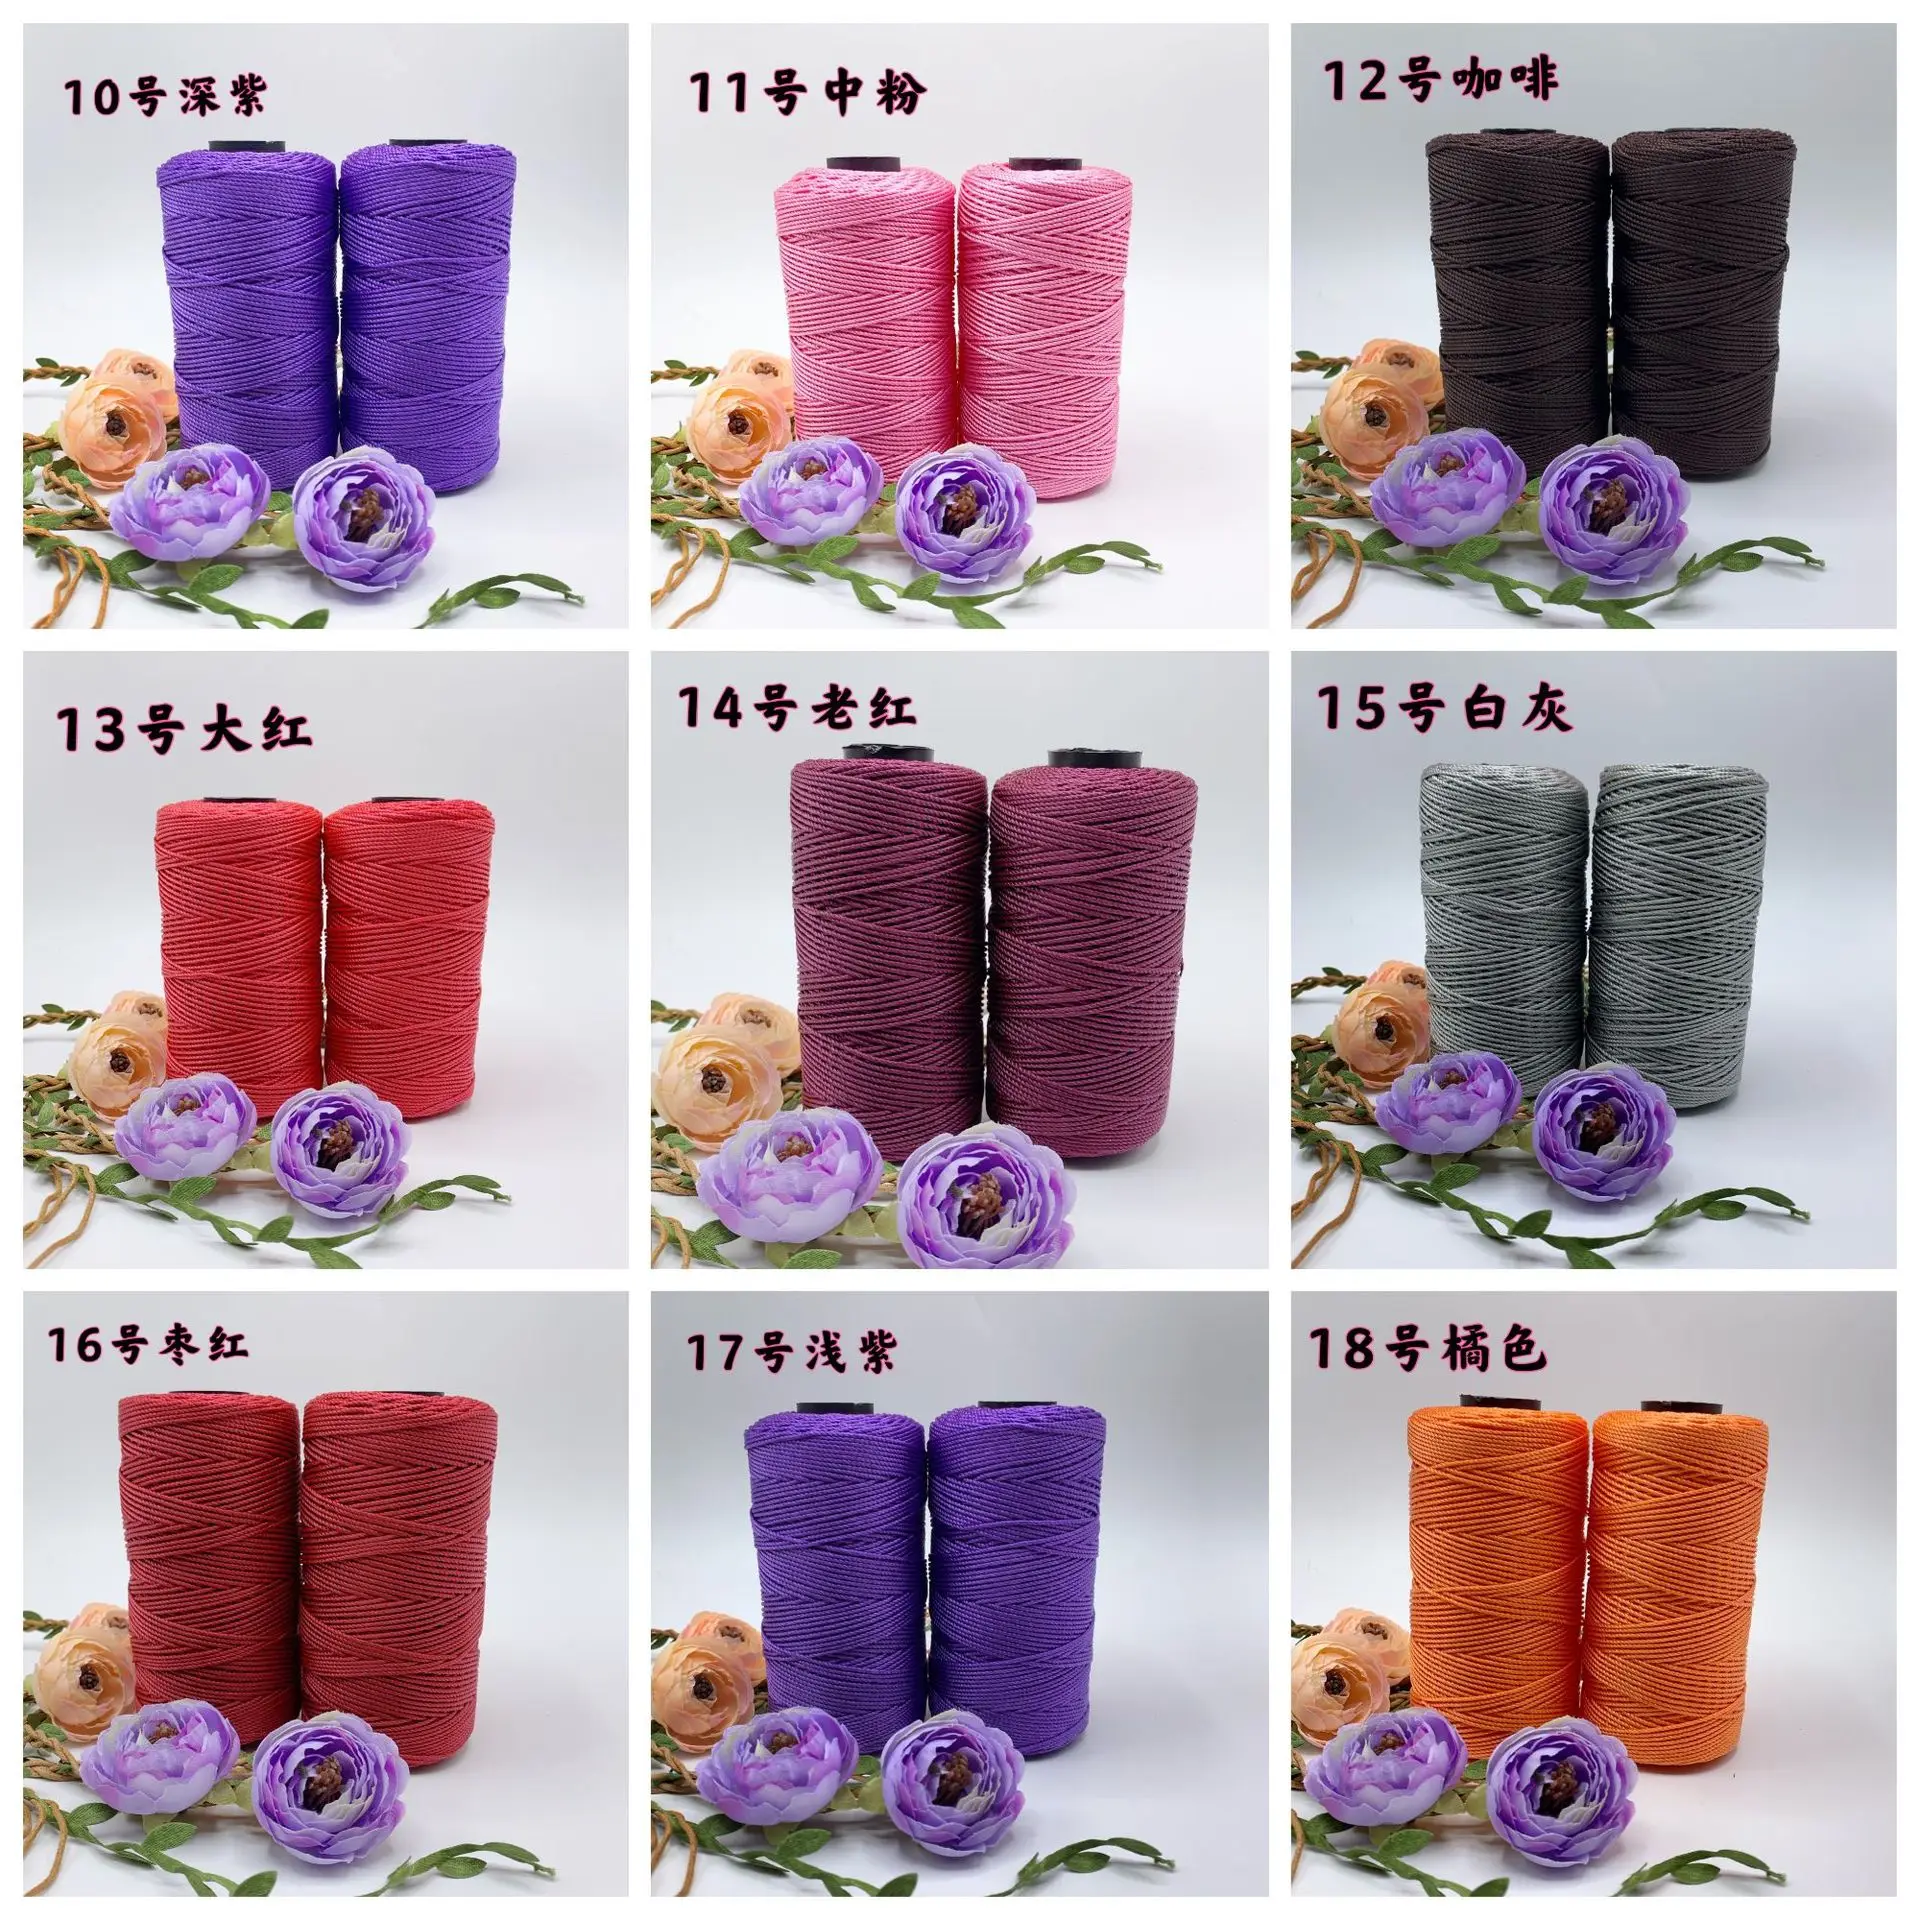 Colourful 100% Linen Thread 120m/roll Twine Cords For Sewing Knitting  Embroidery Crochet Accessory Diy - Thread - AliExpress